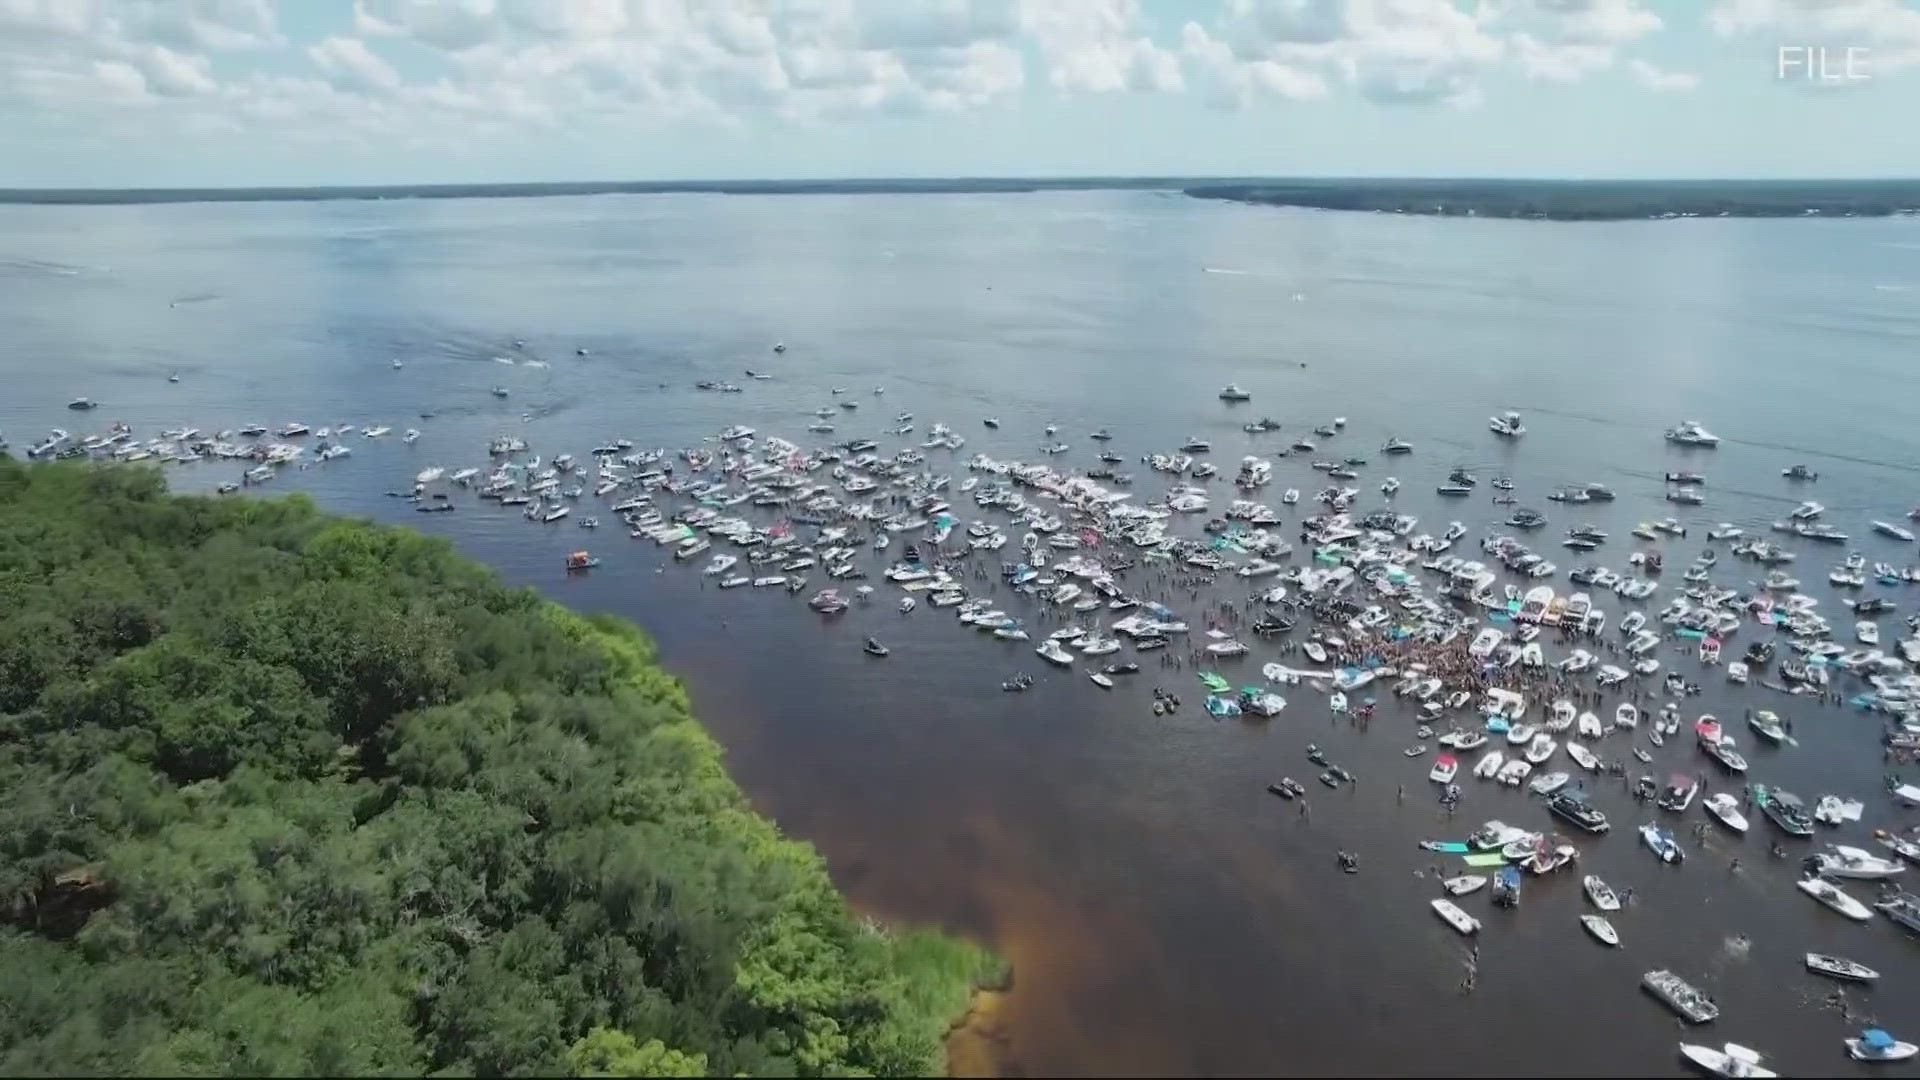 Event planners say Boater Skip Day in Green Cove Springs is the largest boating event in Northeast Florida.